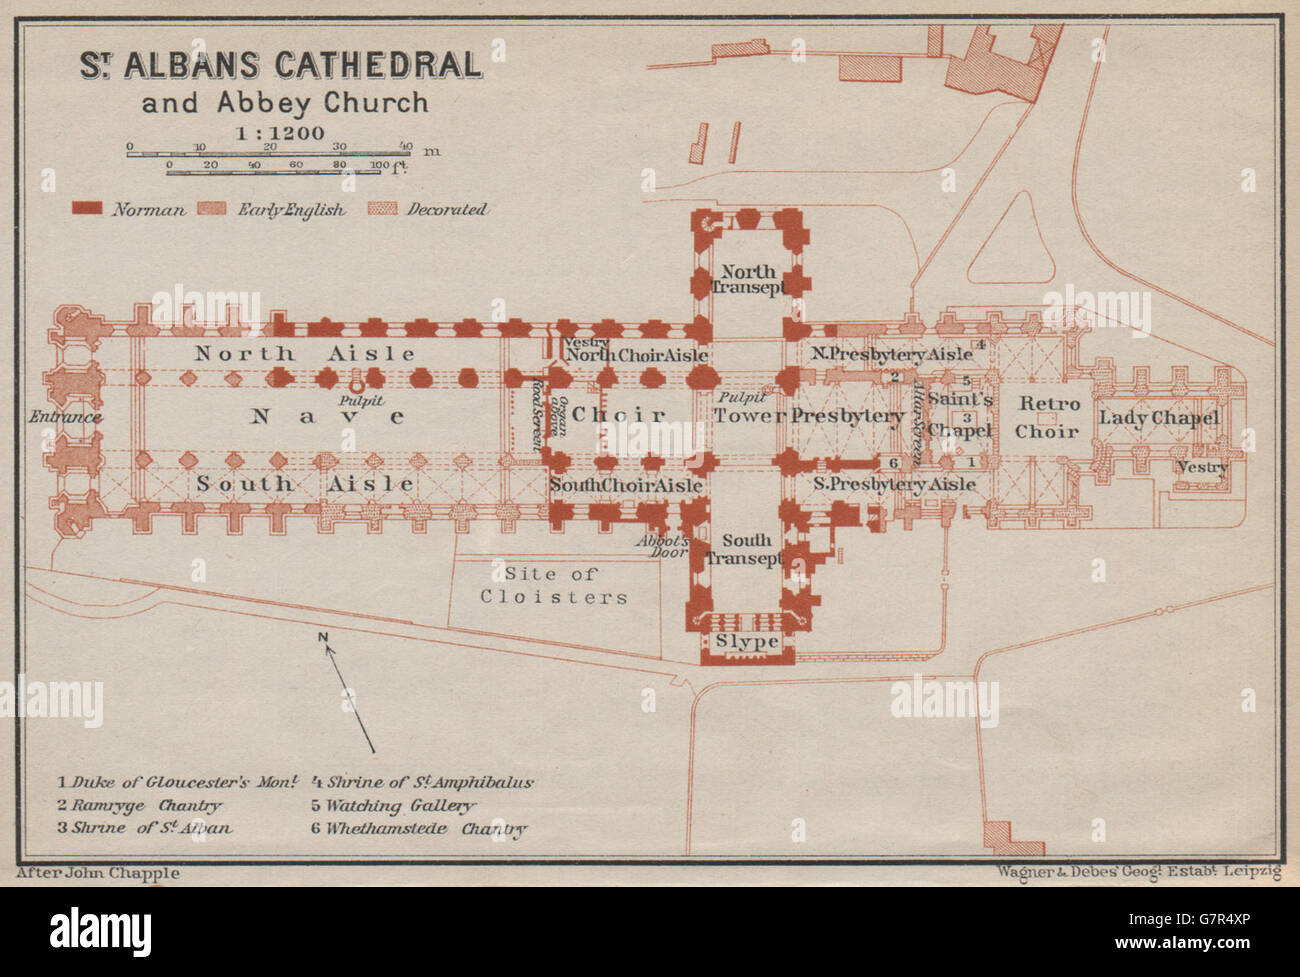 ST. ALBANS CATHEDRAL & ABBEY CHURCH floor plan. Hertfordshire, 1930 old map Stock Photo